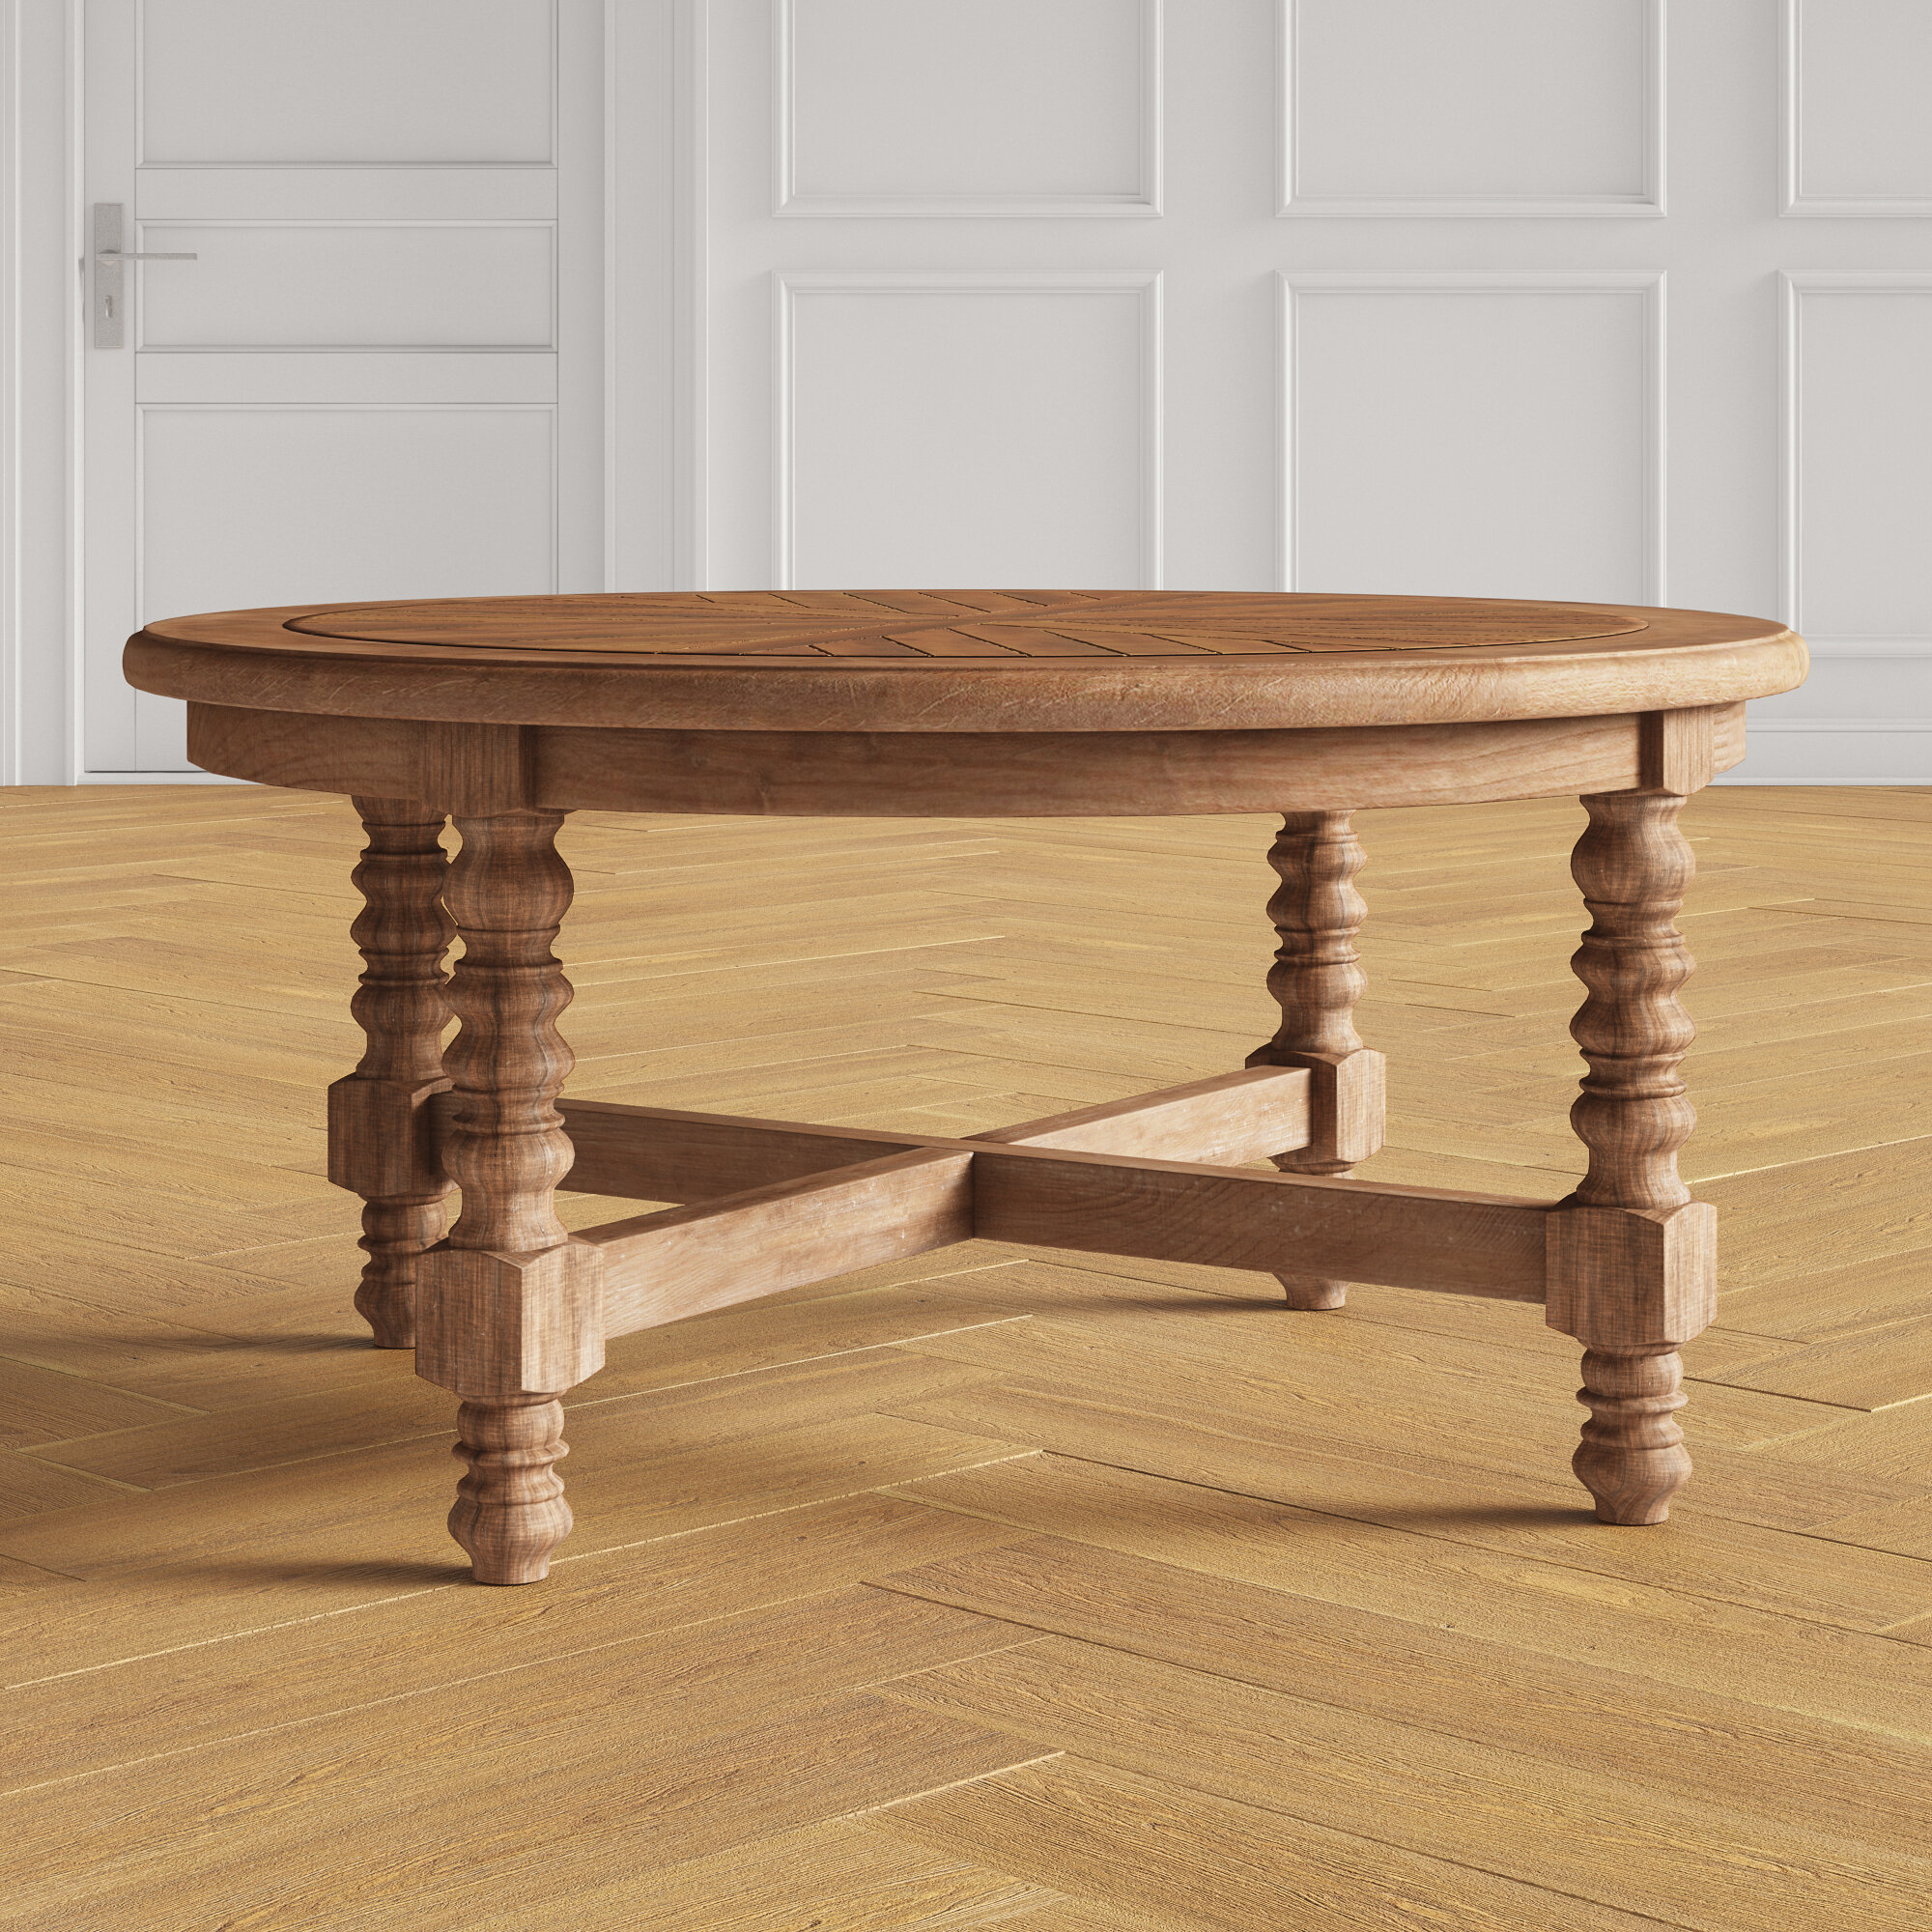 Featured image of post Coffee Table Round Wood / Made out of wood and featuring a unique distressed finish.